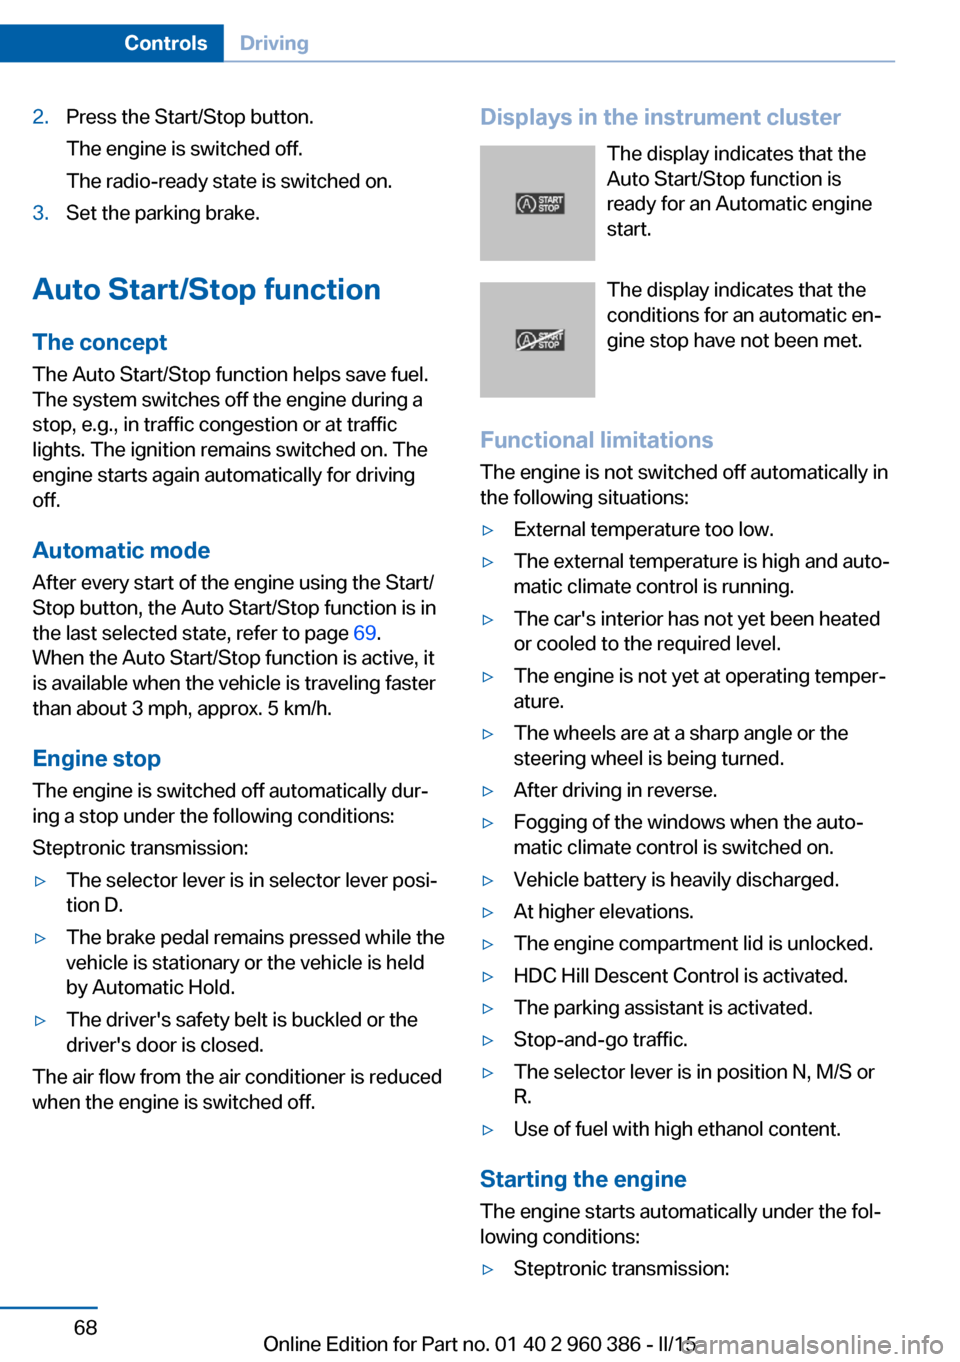 BMW X3 2016 F25 User Guide 2.Press the Start/Stop button.
The engine is switched off.
The radio-ready state is switched on.3.Set the parking brake.
Auto Start/Stop function
The concept The Auto Start/Stop function helps save fu